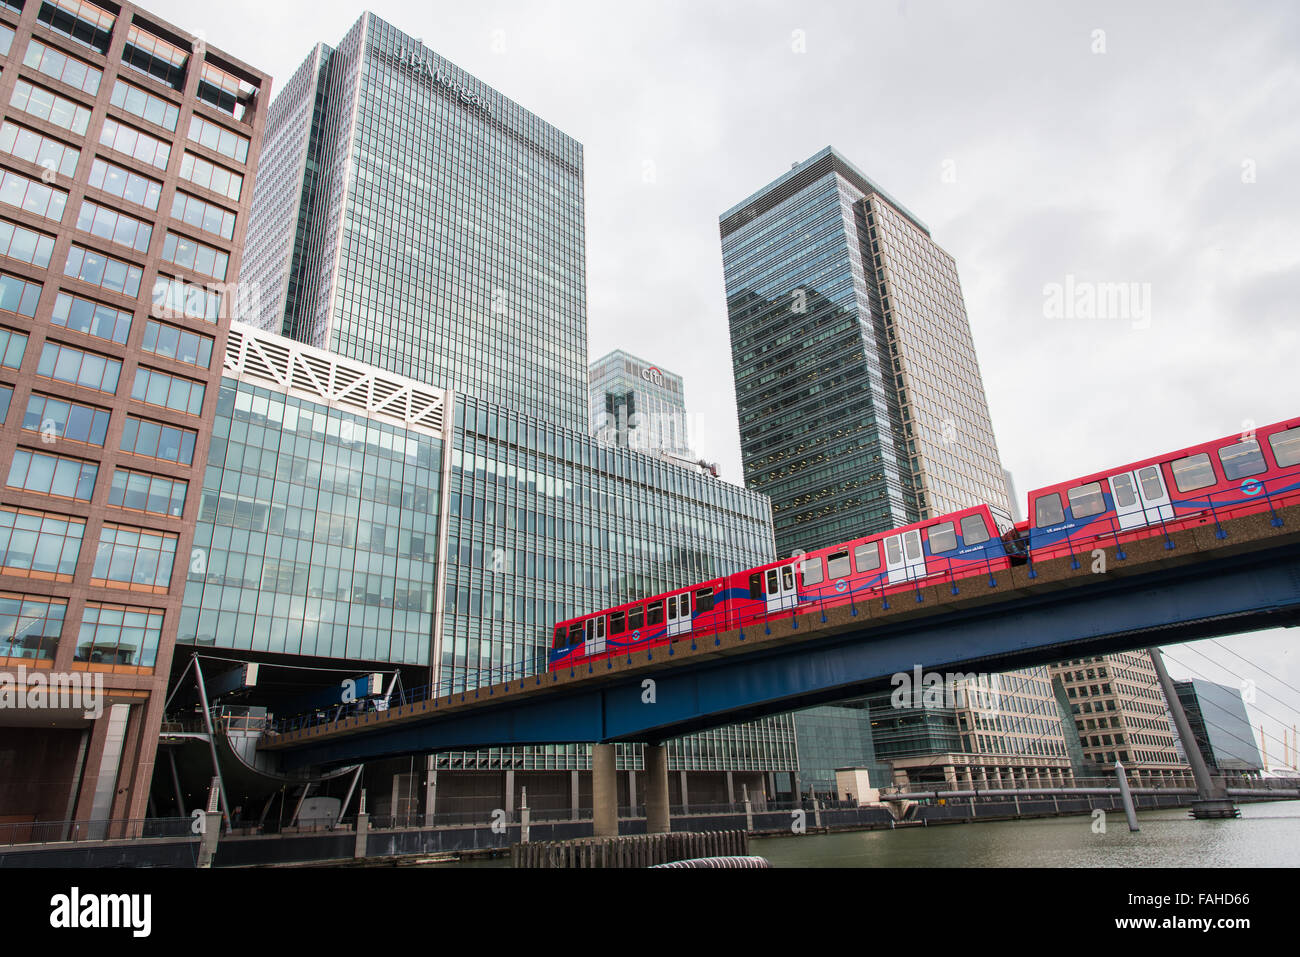 Docklands Light Railway, DLR,  metro  entering the station  located inside the modern skyscrapers at Docklands area in  Canary wharf district, London Stock Photo